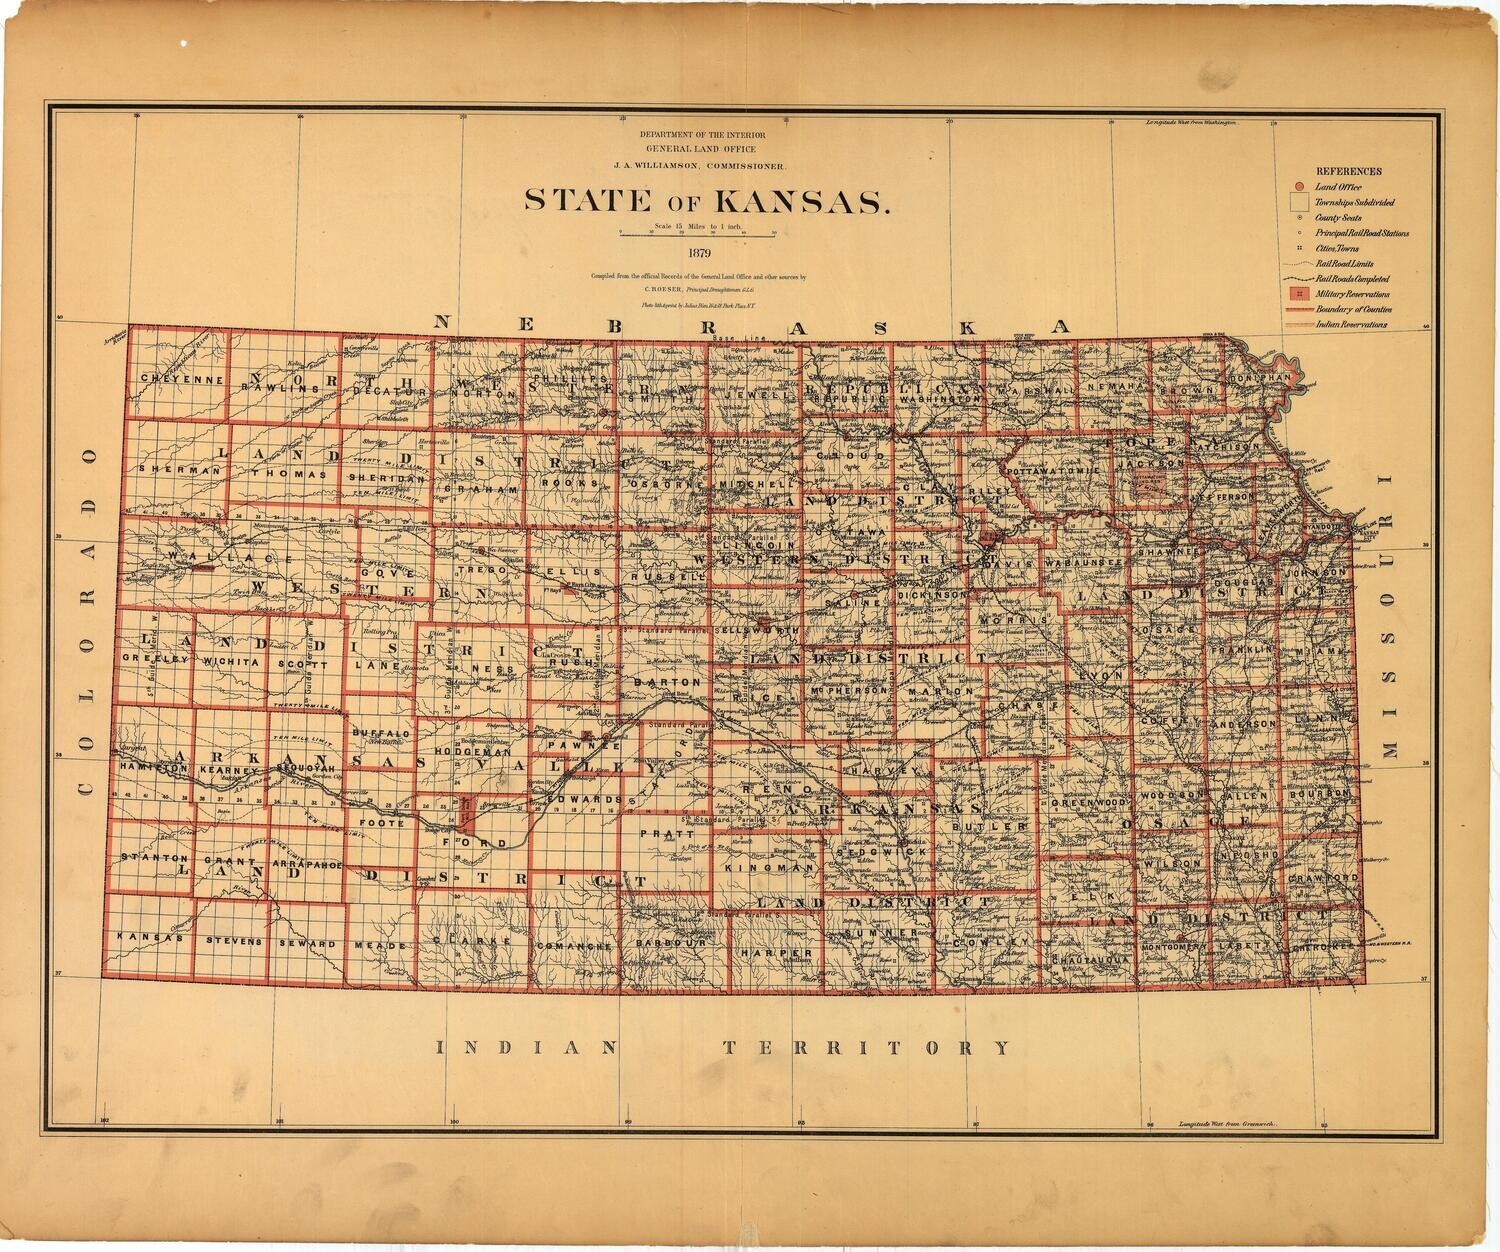 1879 Map of the State of Kansas by the GLO